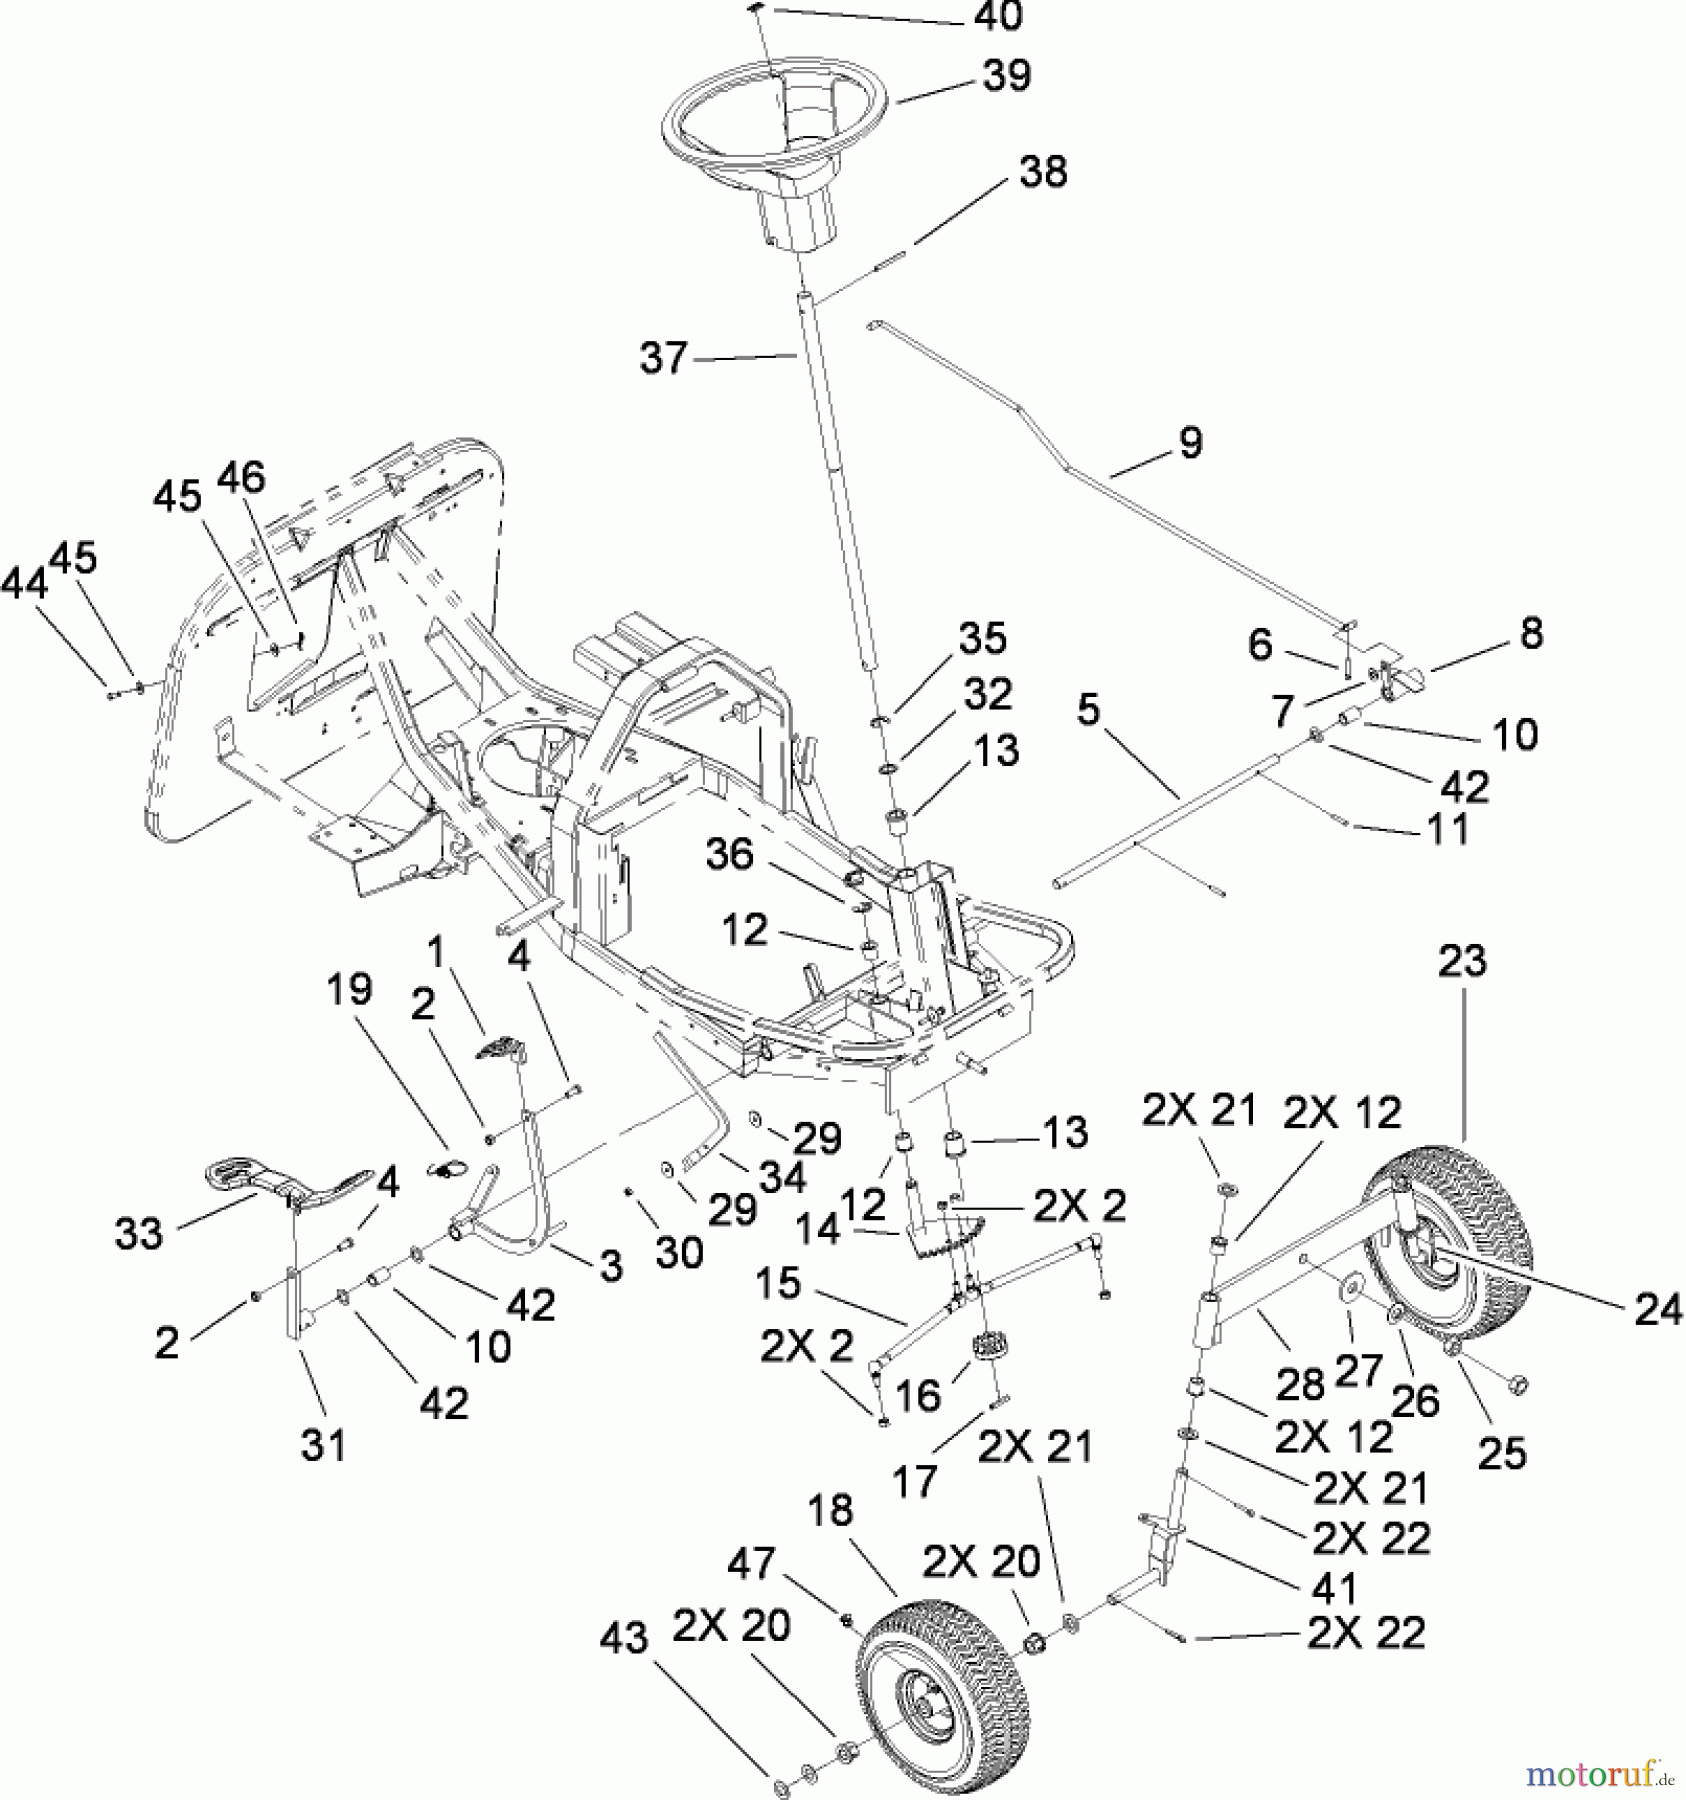  Toro Neu Mowers, Rear-Engine Rider 70186 (H132) - Toro H132 Rear-Engine Riding Mower, 2009 (280899435-290999999) FRONT AXLE AND STEERING ASSEMBLY